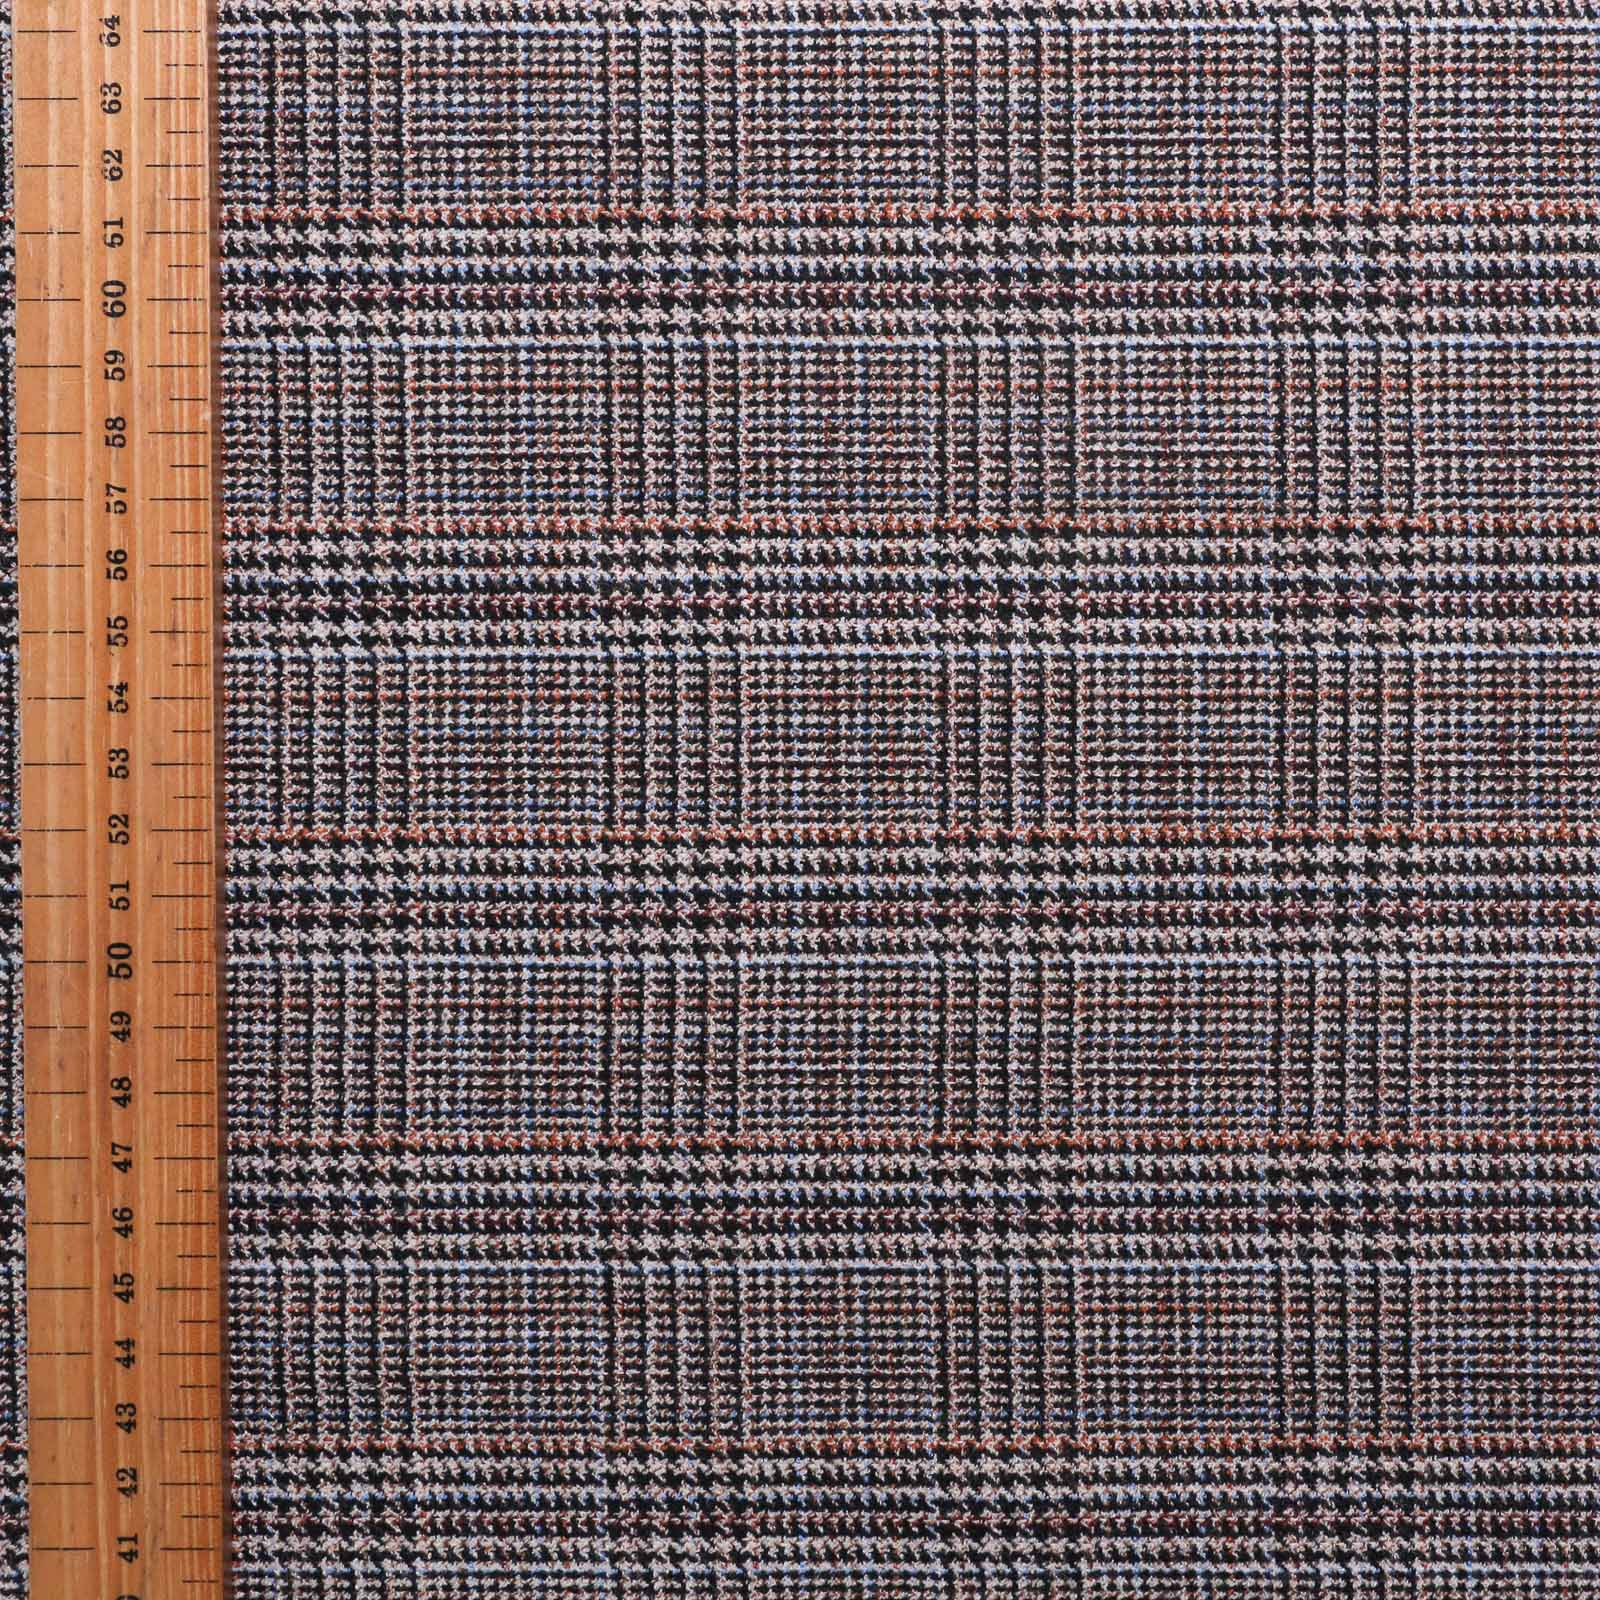 metre wool blend stretchy suiting dressmaking fabric with black and caramel check pattern on beige